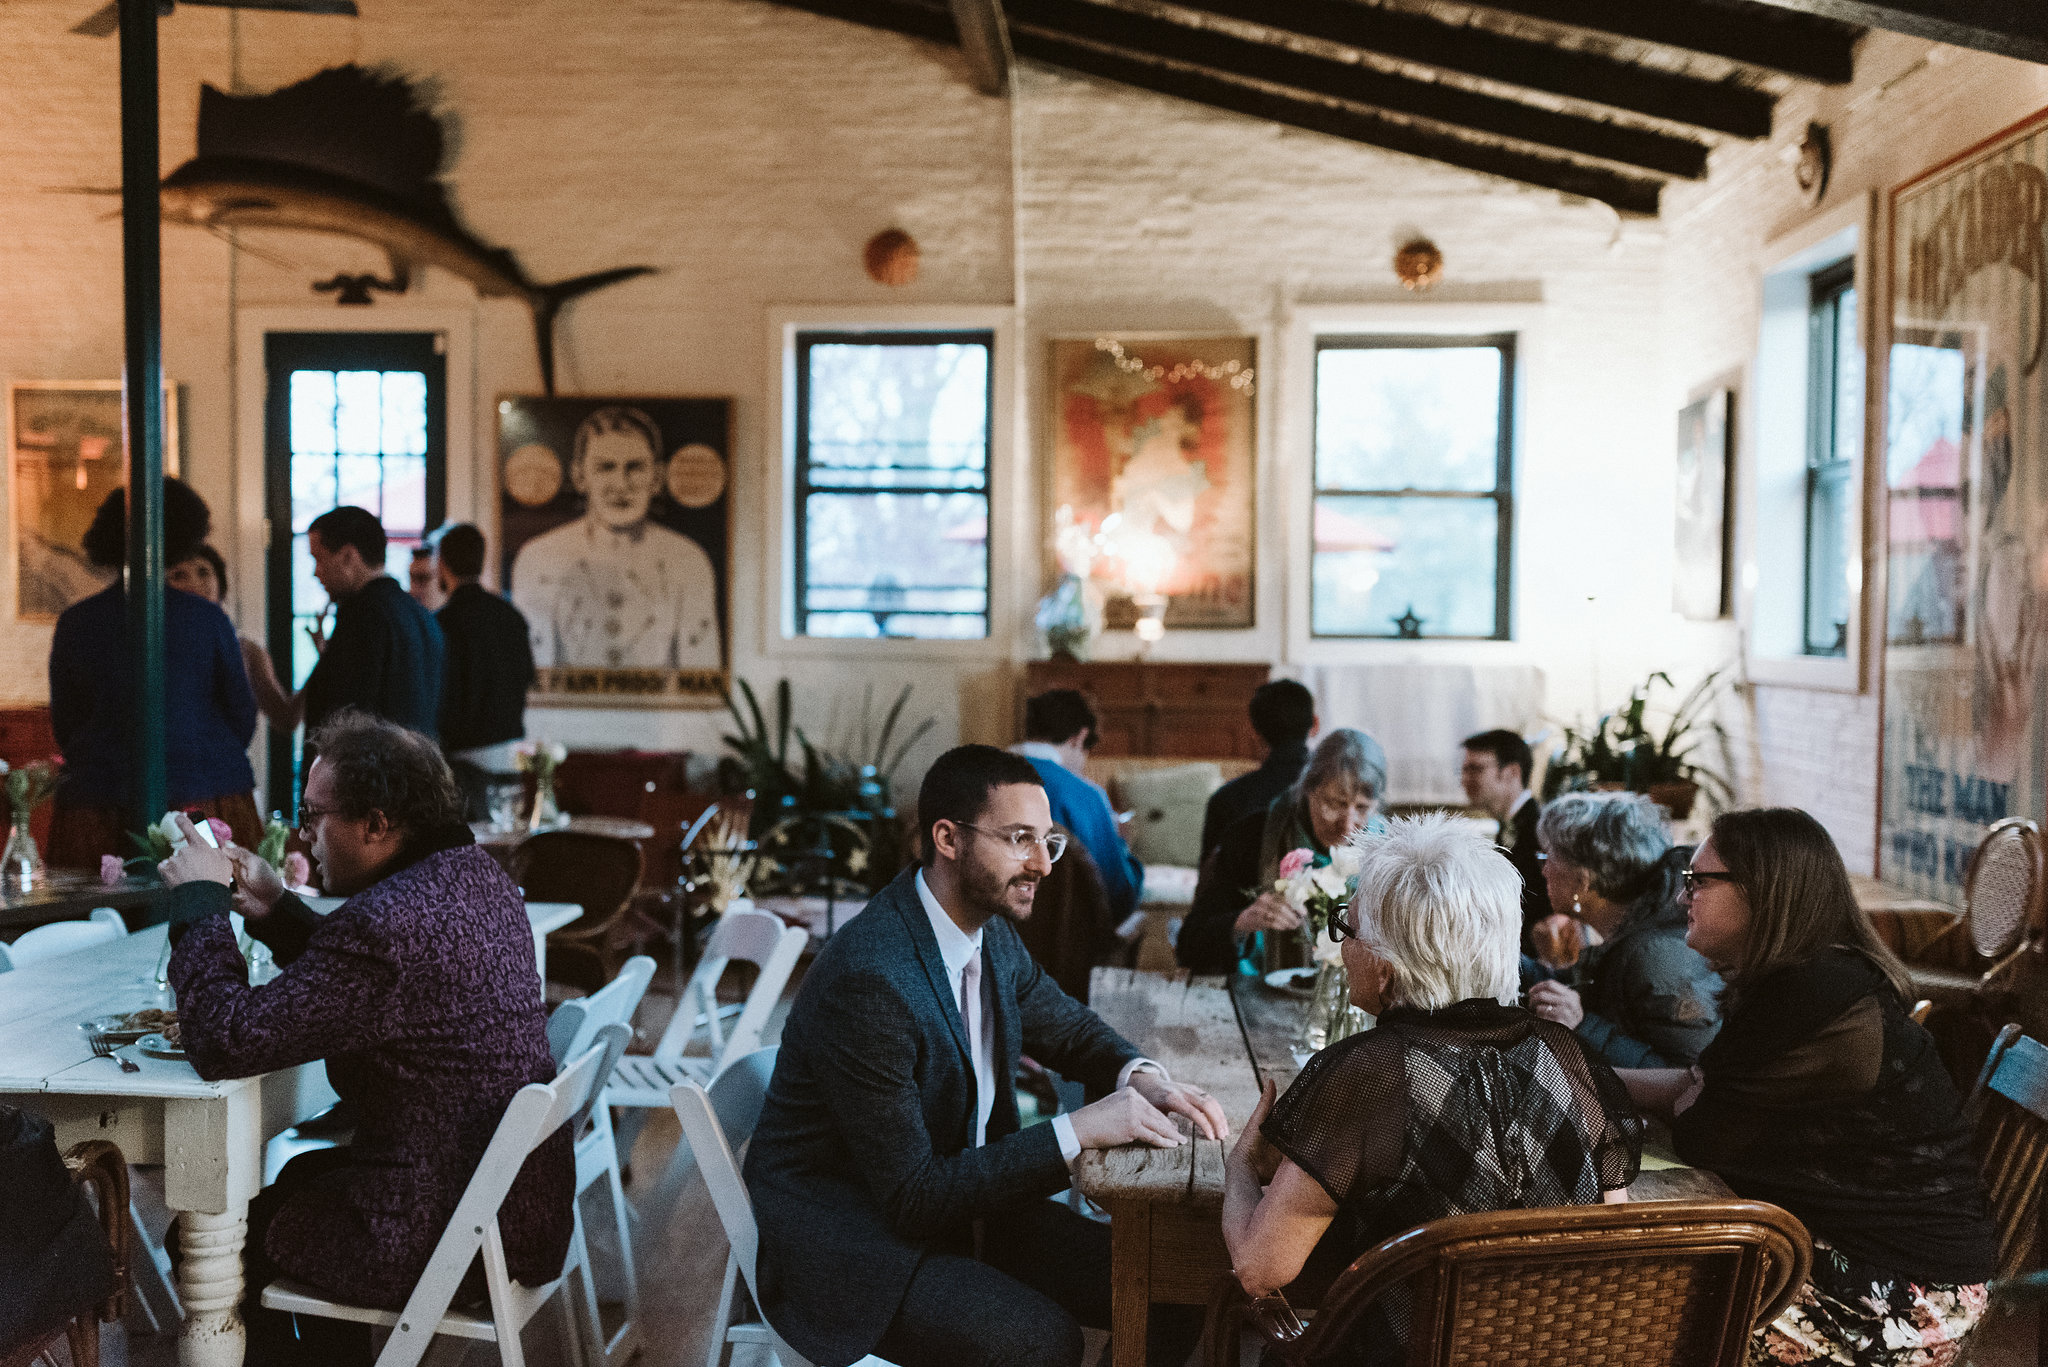  Baltimore, Maryland Wedding Photographer, Hampden, Eco-Friendly, Green, The Elm, Simple and Classic, Vintage, Wedding Guests Enjoying Reception 